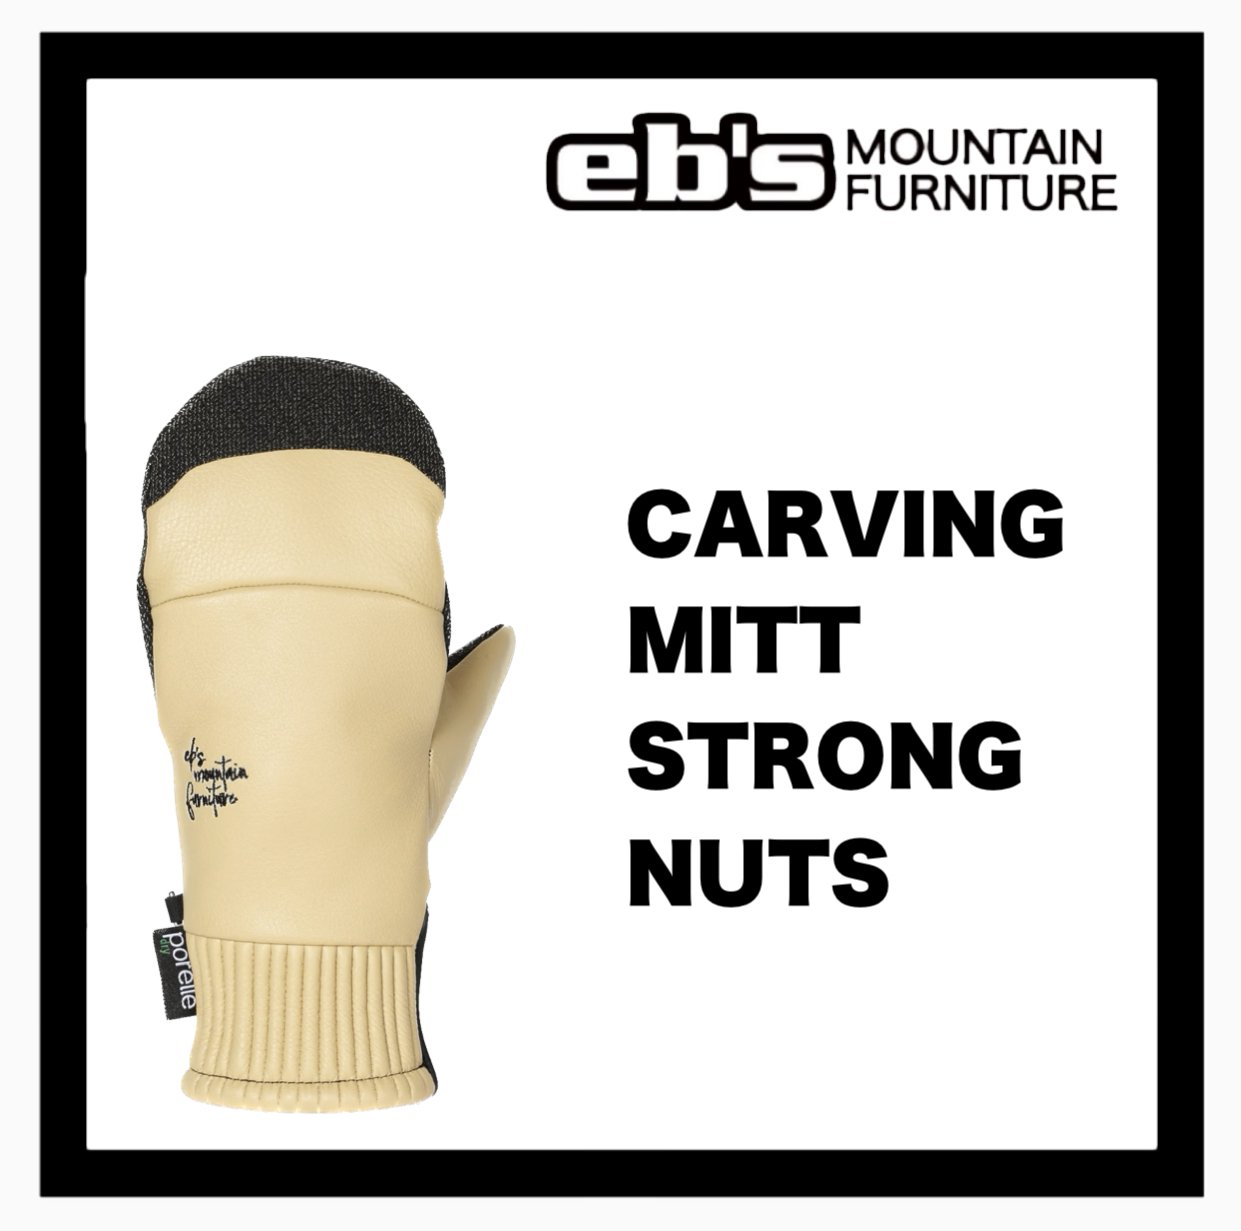 <img class='new_mark_img1' src='https://img.shop-pro.jp/img/new/icons34.gif' style='border:none;display:inline;margin:0px;padding:0px;width:auto;' />eb'sCARVING MITT / STRONG  NUTS